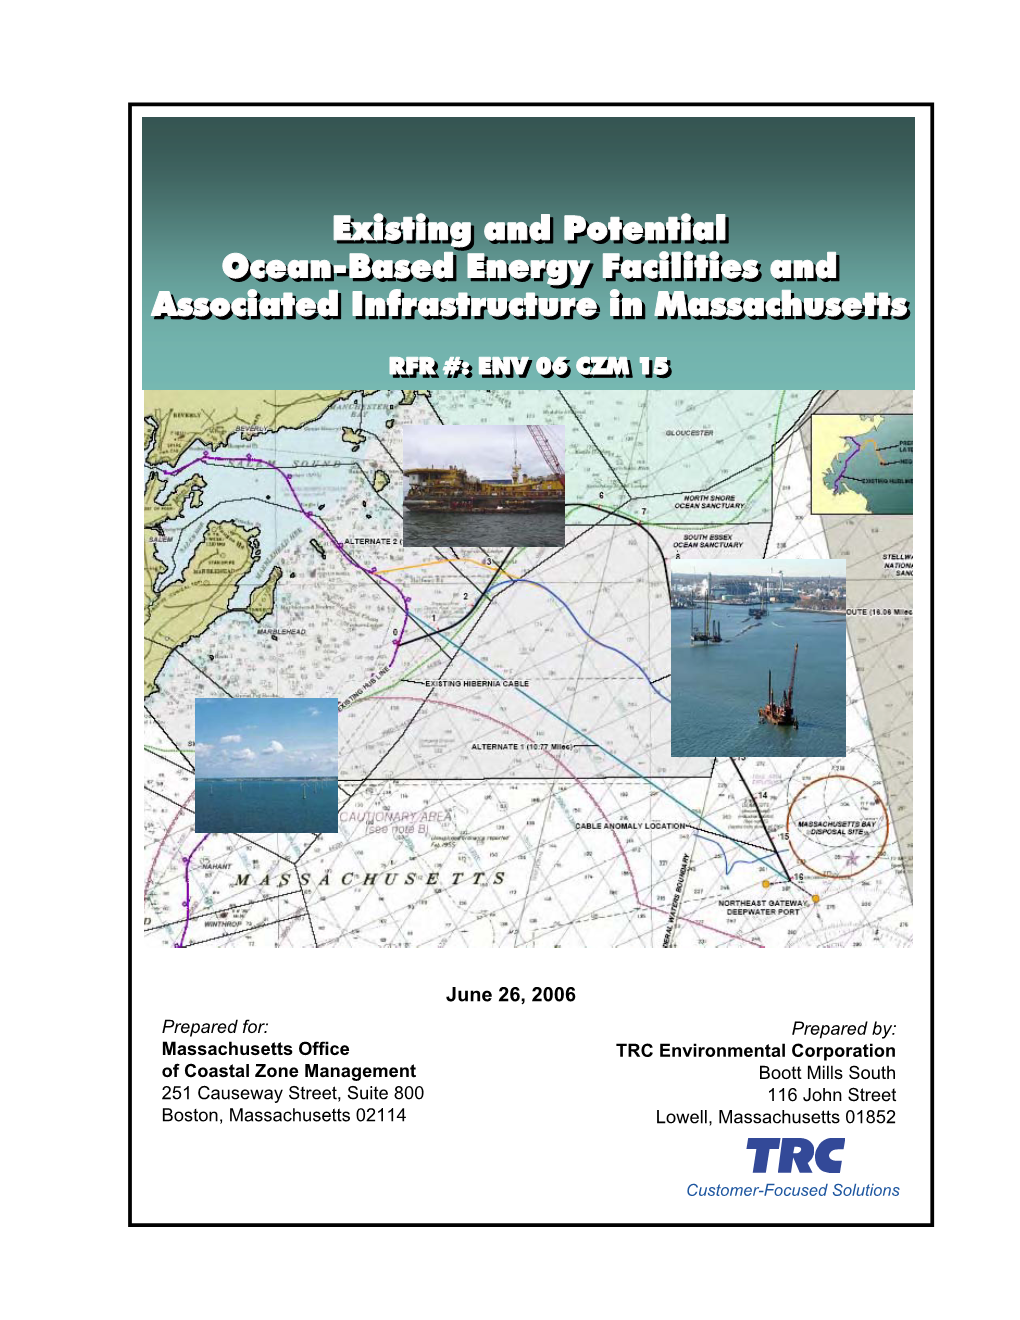 Existing and Potential Ocean-Based Energy Facilities and Associated